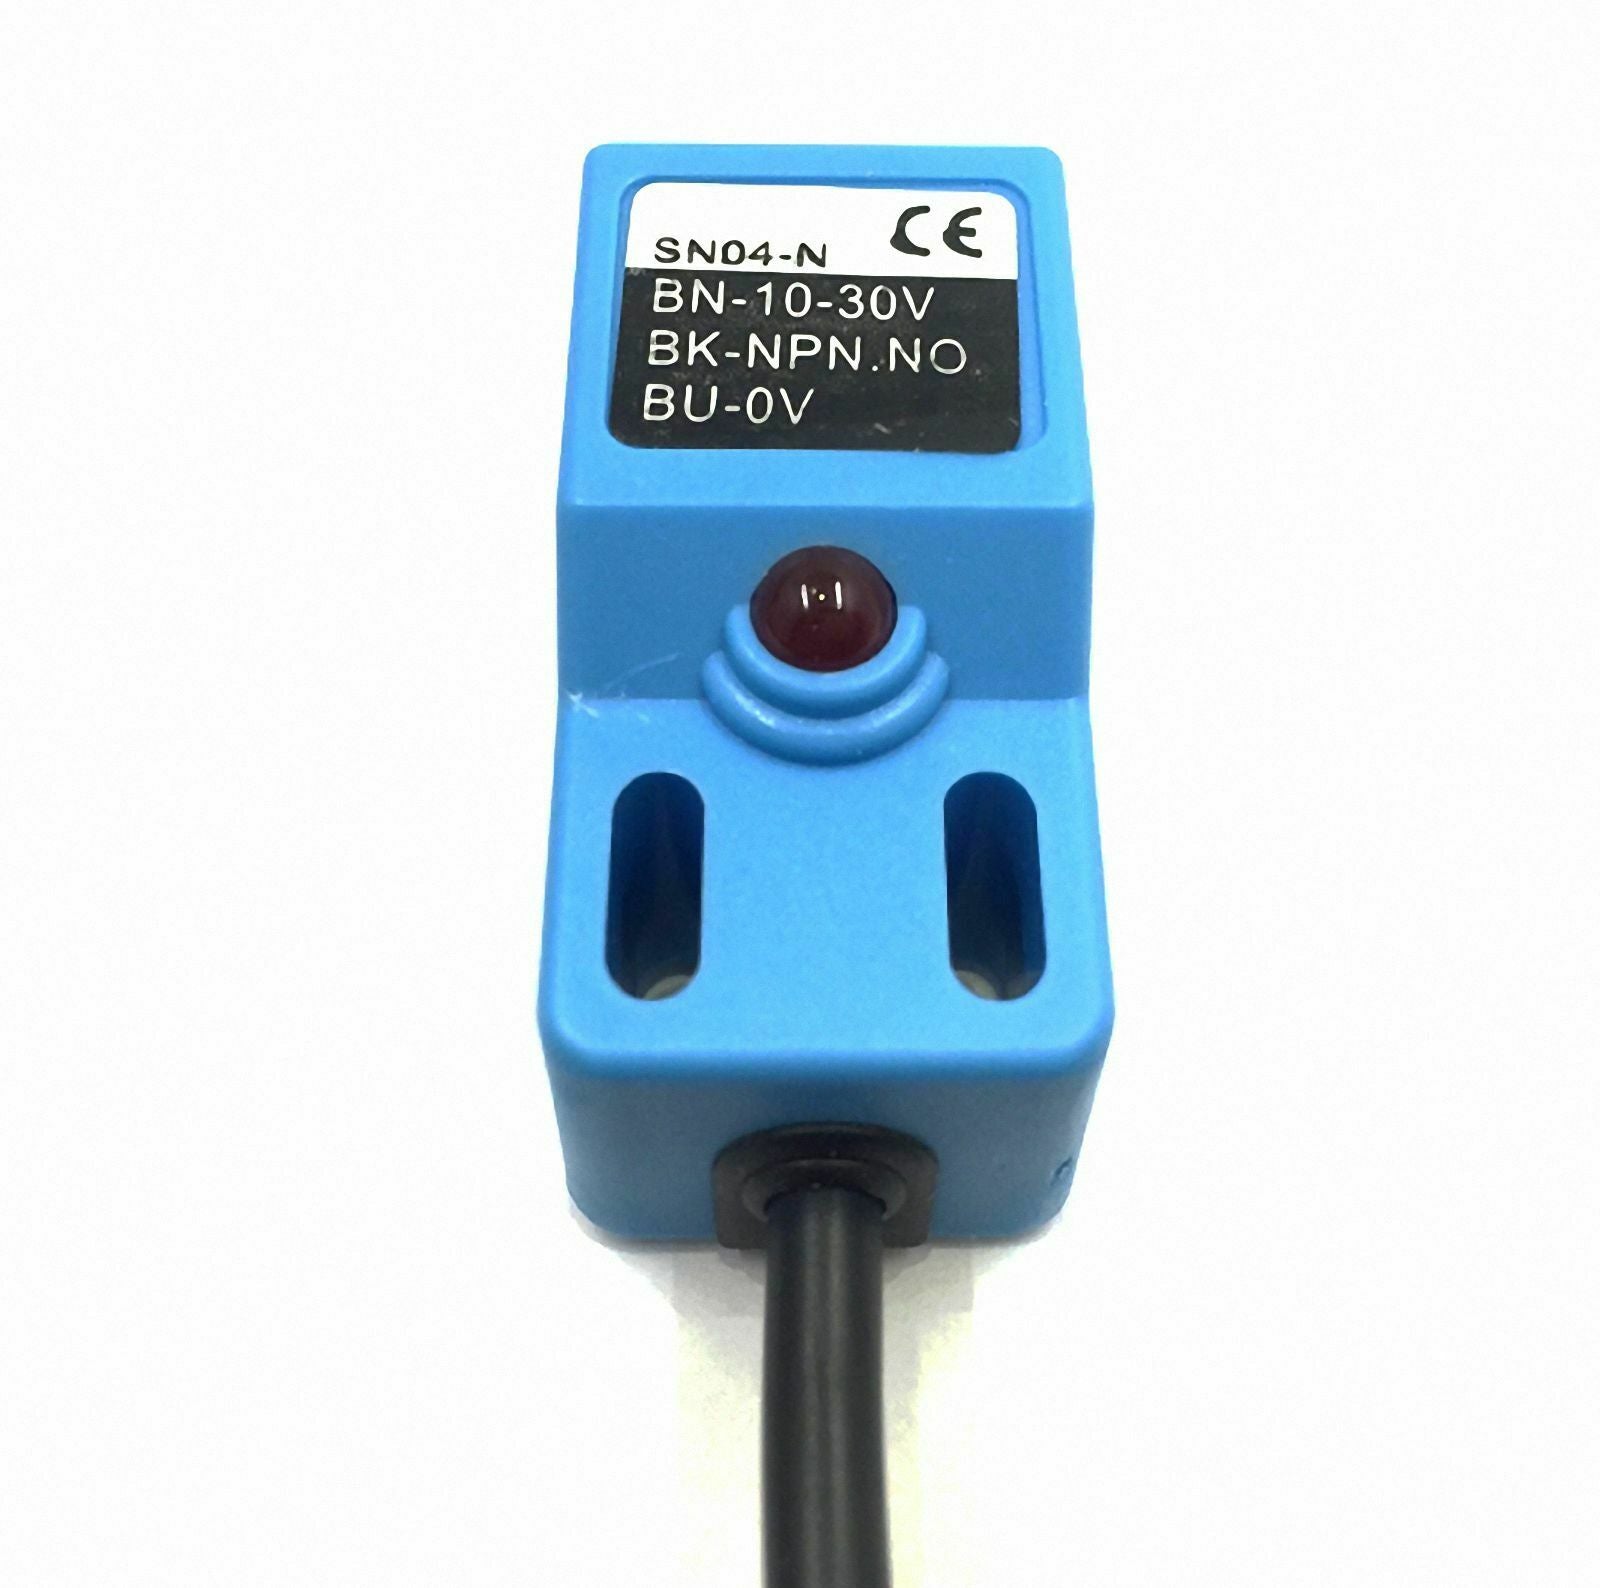 ( Dimention: 18x18x34mm ) Inductive Proximity Switch 5mm Detection NPN [M_M_S]